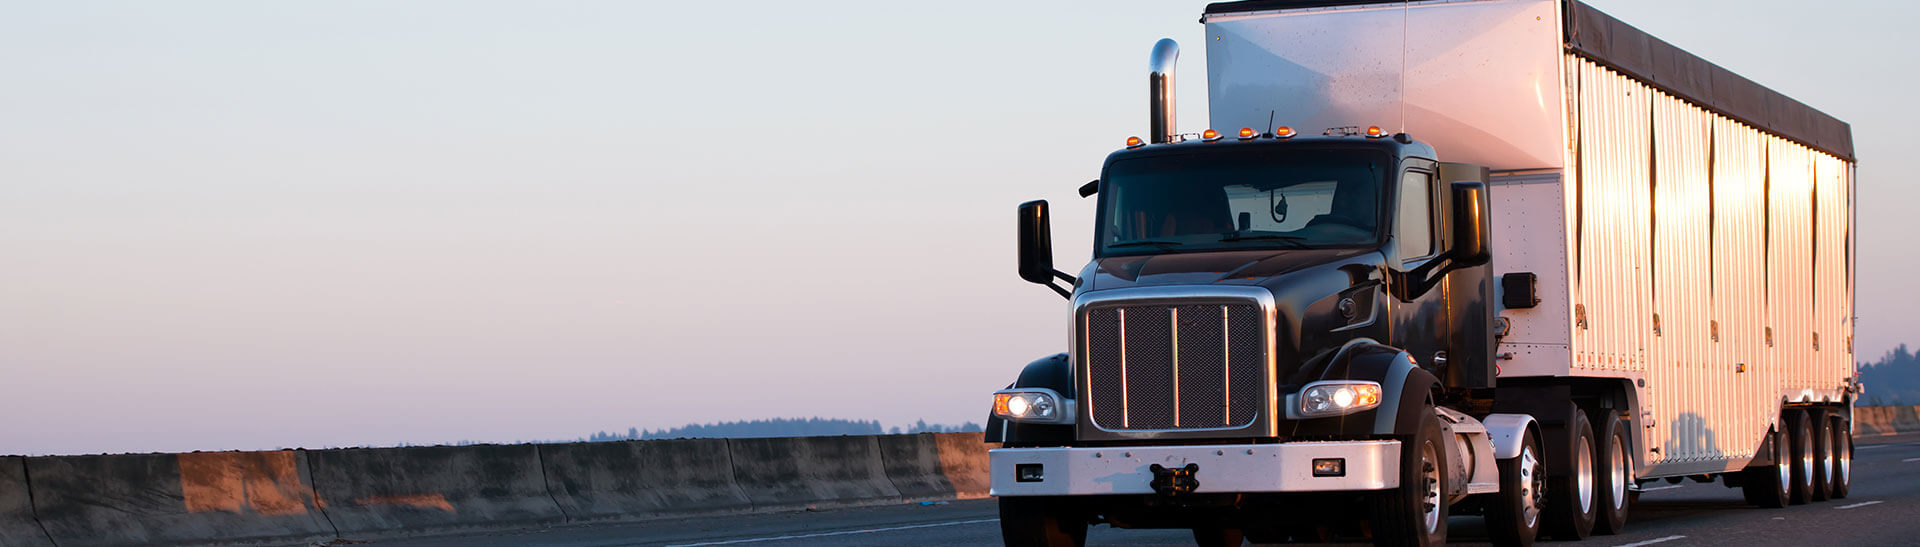 Fairfield Trucking Company, Trucking Services and Long Haul Trucking